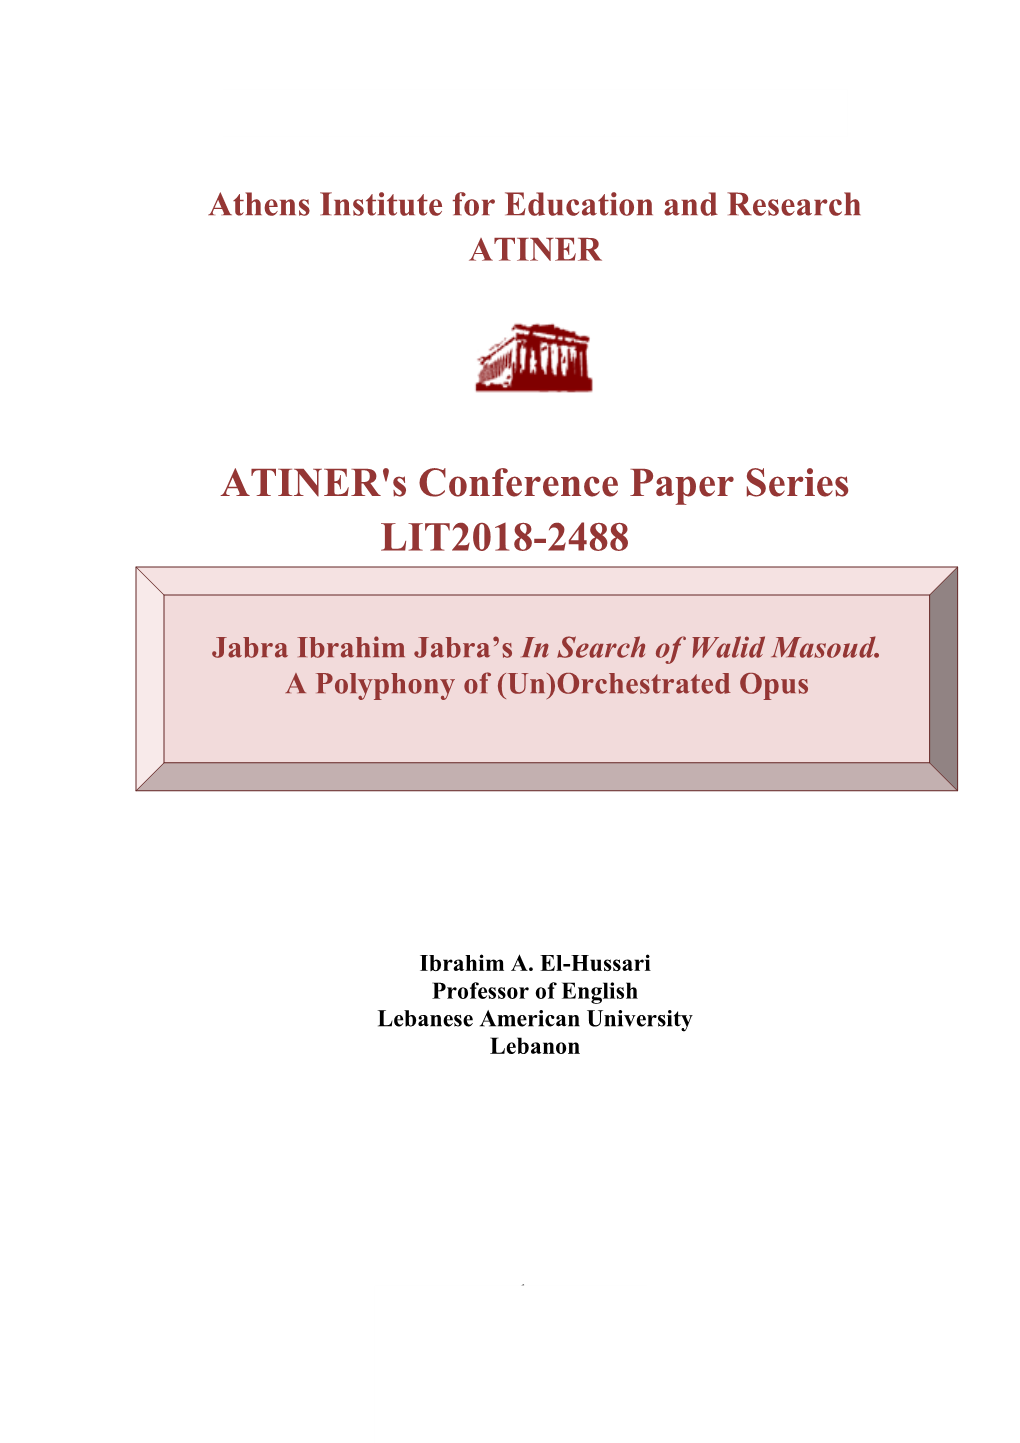 ATINER's Conference Paper Series LIT2018-2488